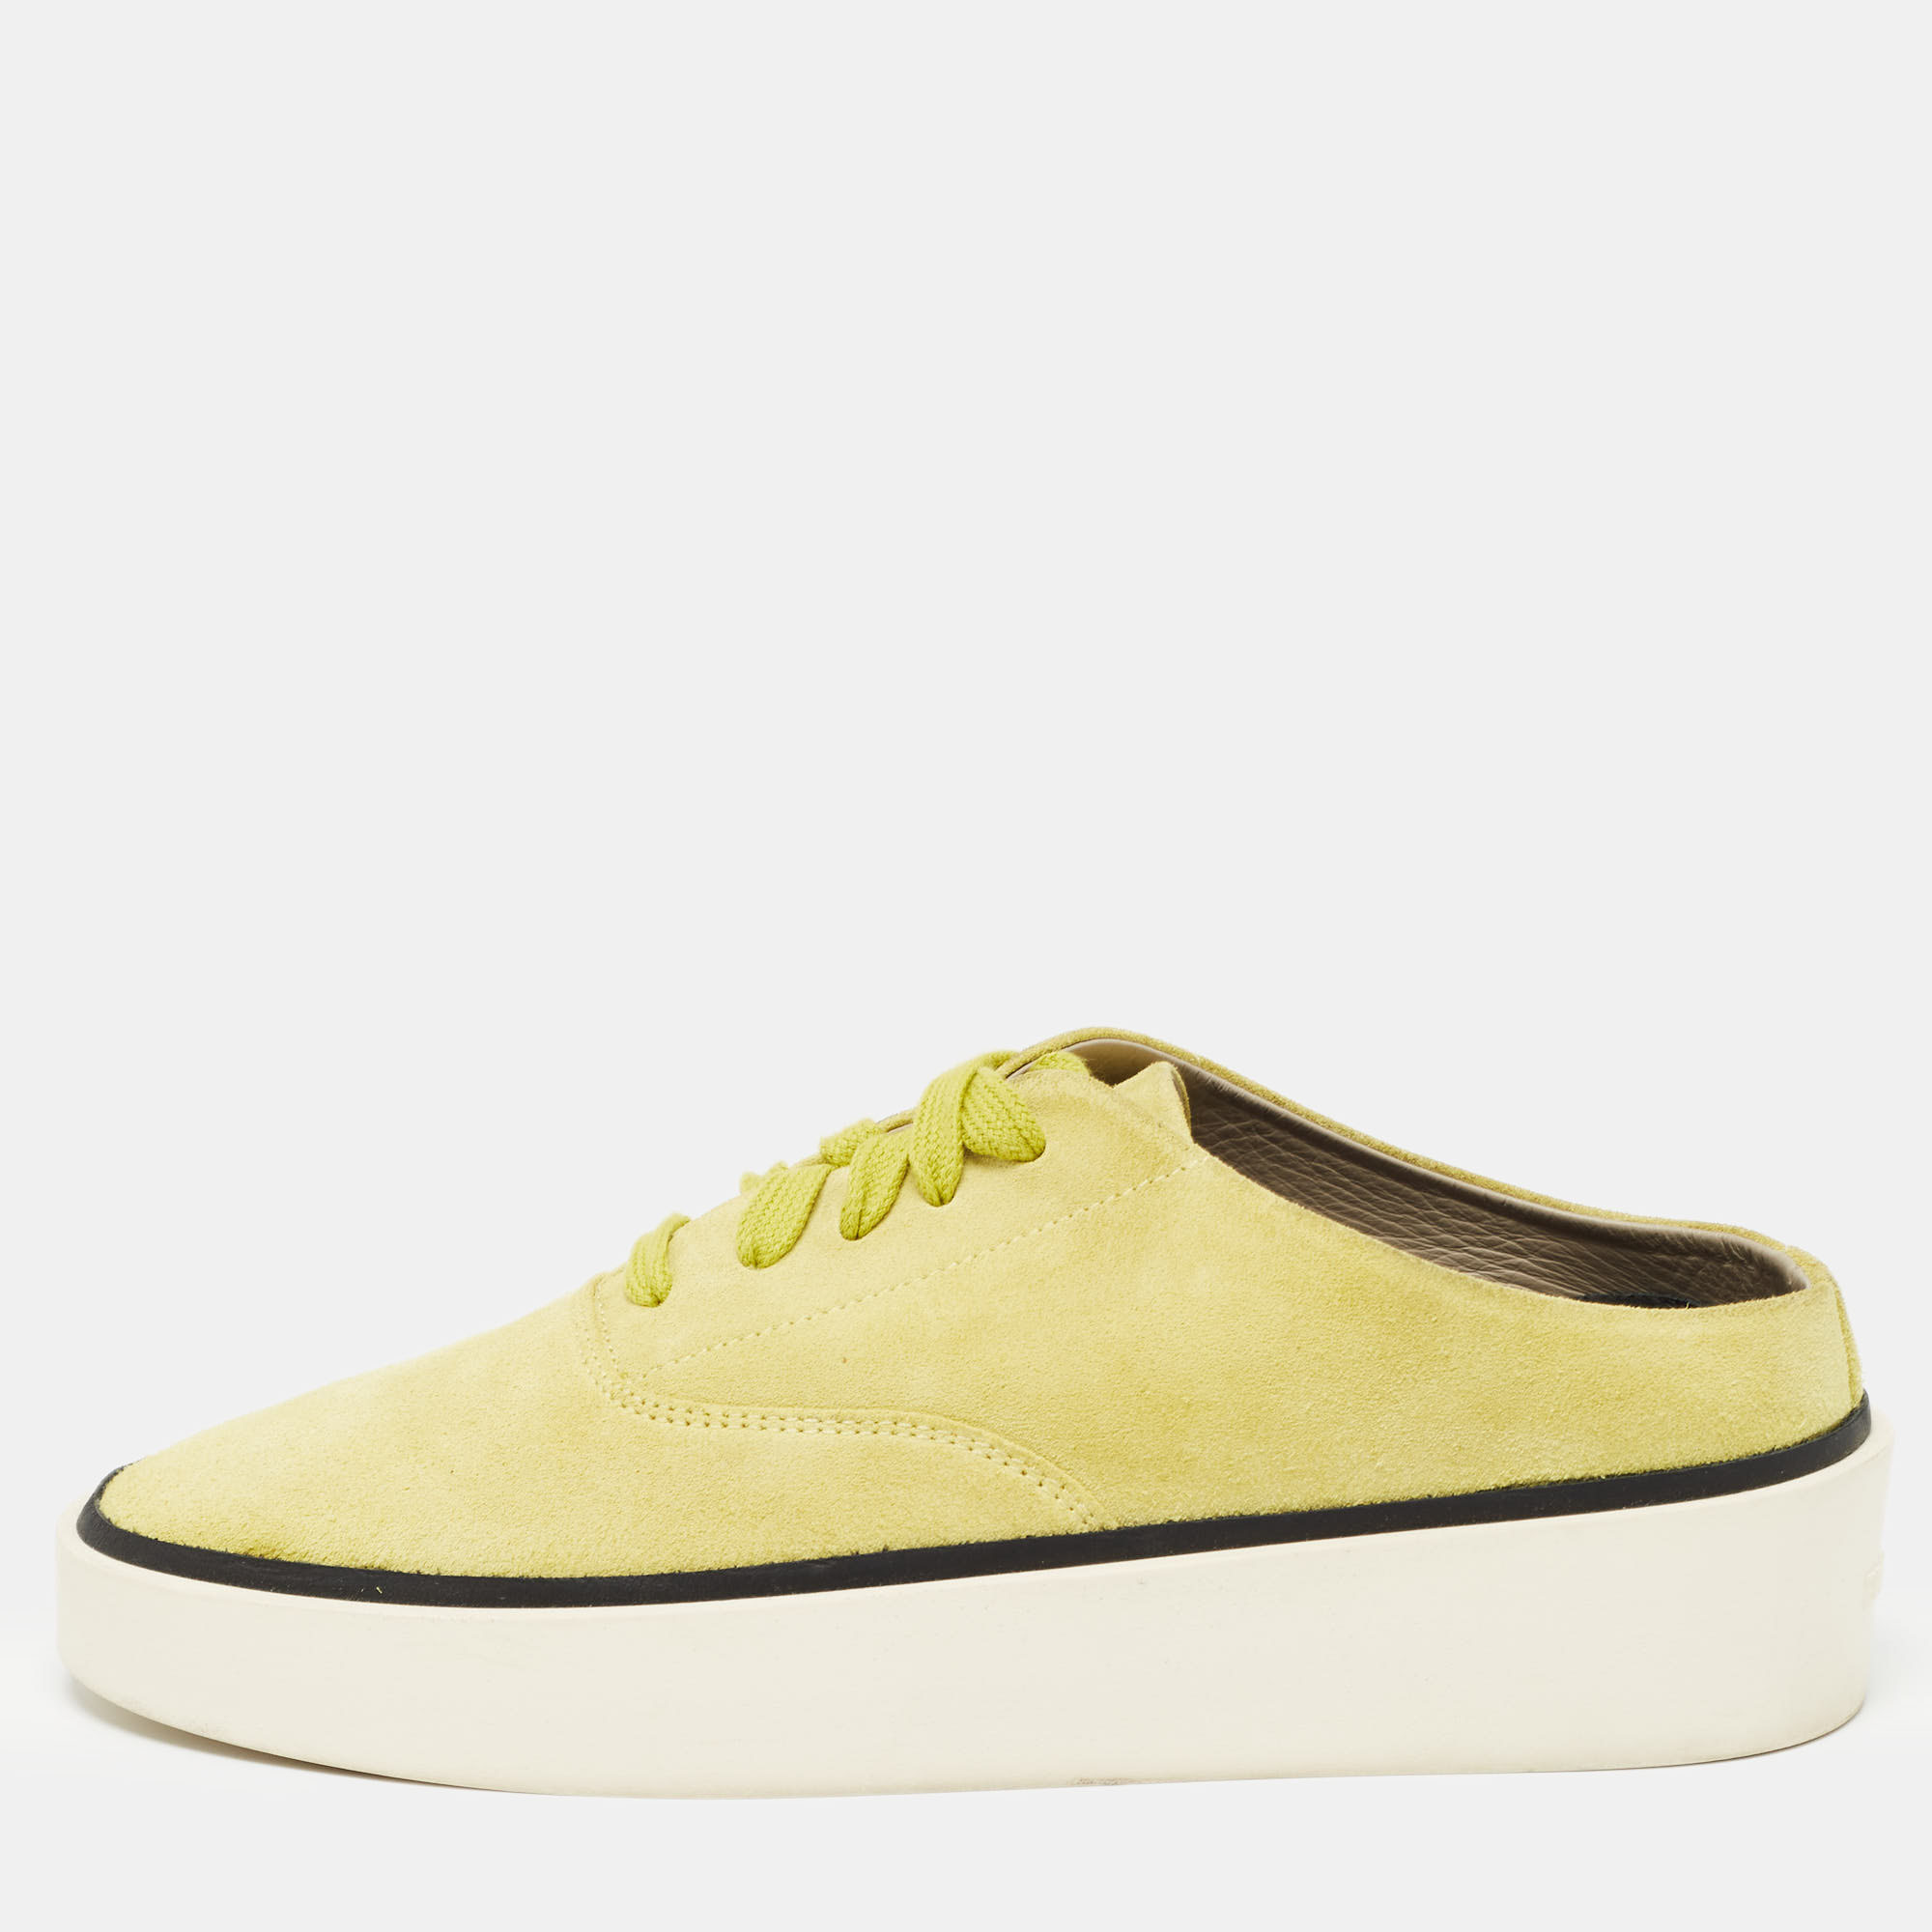 Fear of god green suede 101 backless sneakers size 38